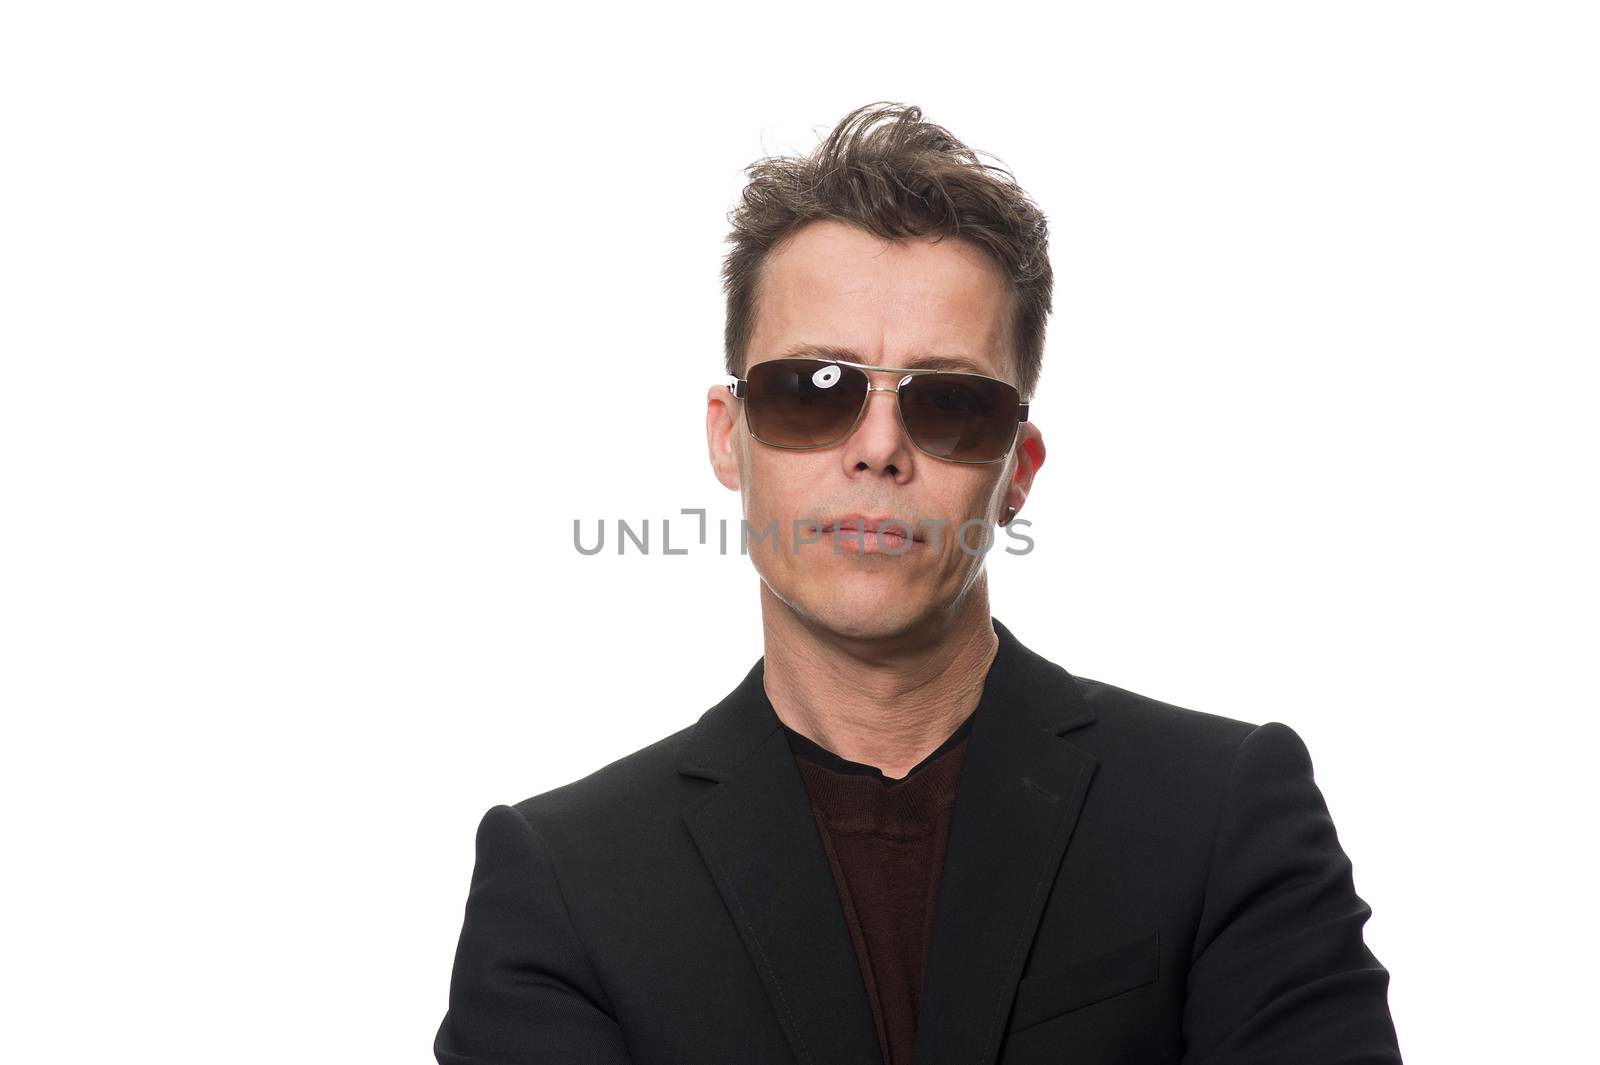 Businessman Wearing Sunglasses Isolated on White by MOELLERTHOMSEN